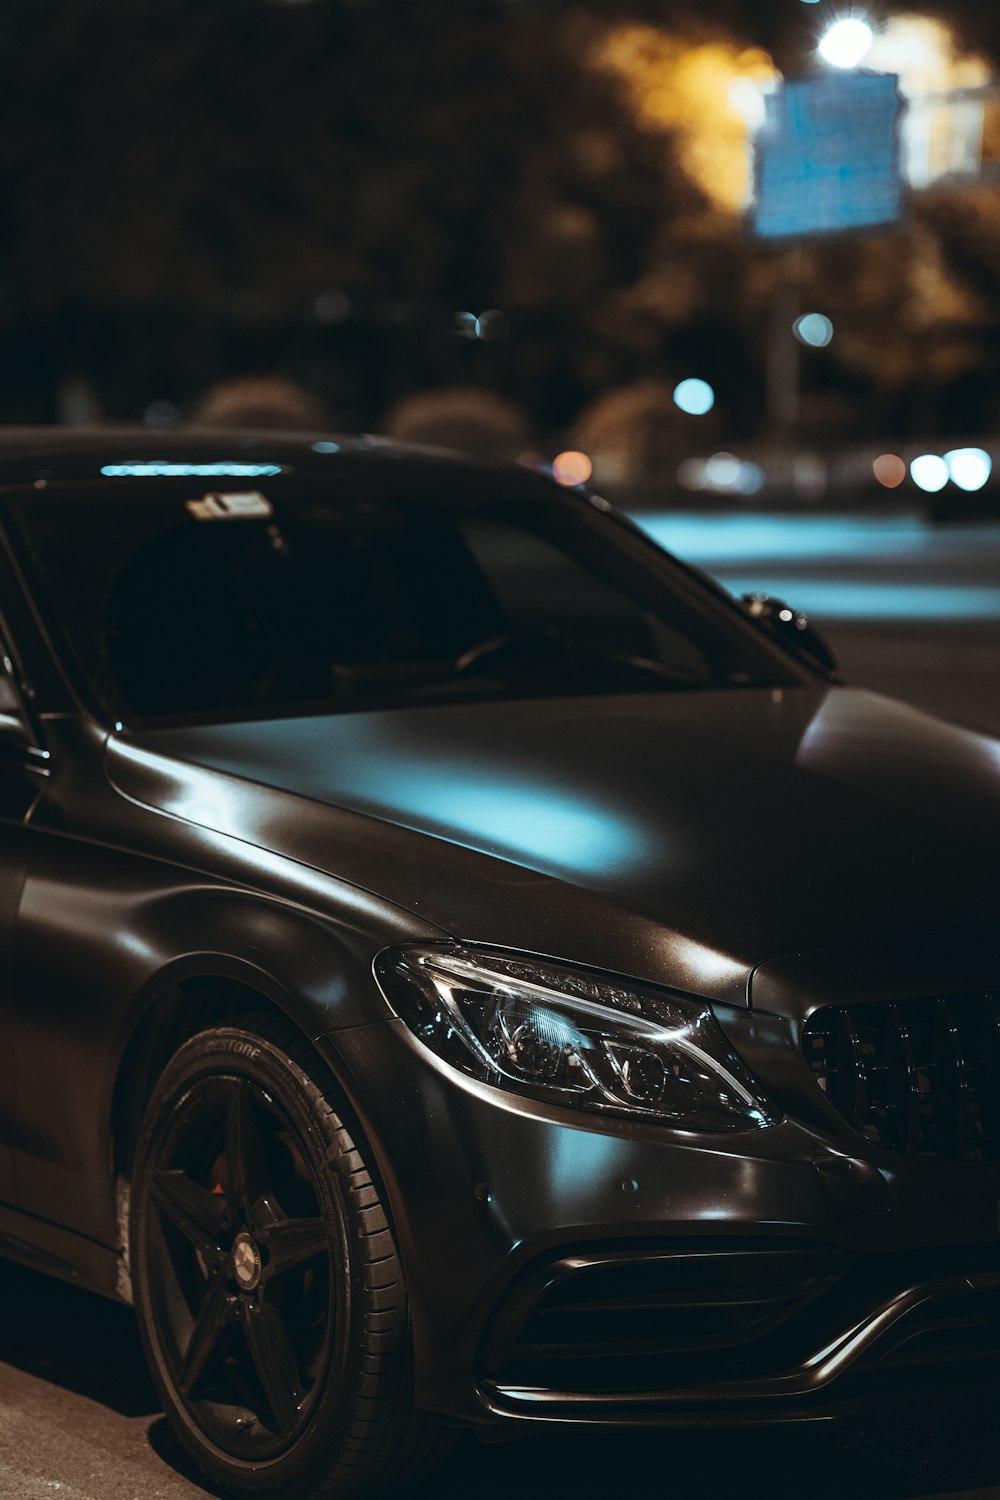 black mercedes benz c class on road during night time photo – Free Night  view Image on Unsplash